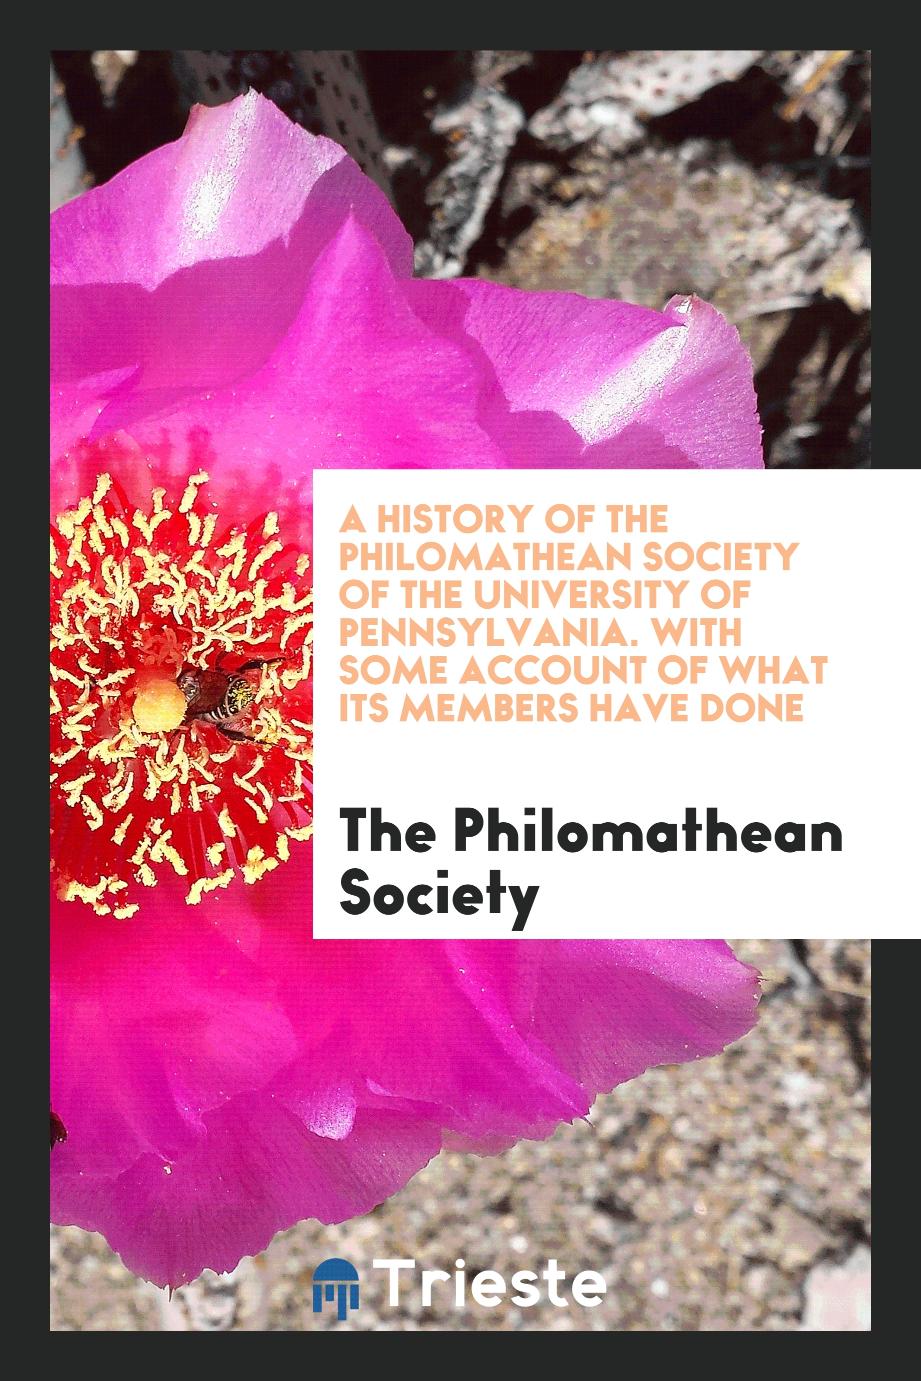 A History of the Philomathean Society of the University of Pennsylvania. With Some Account of What Its Members Have Done